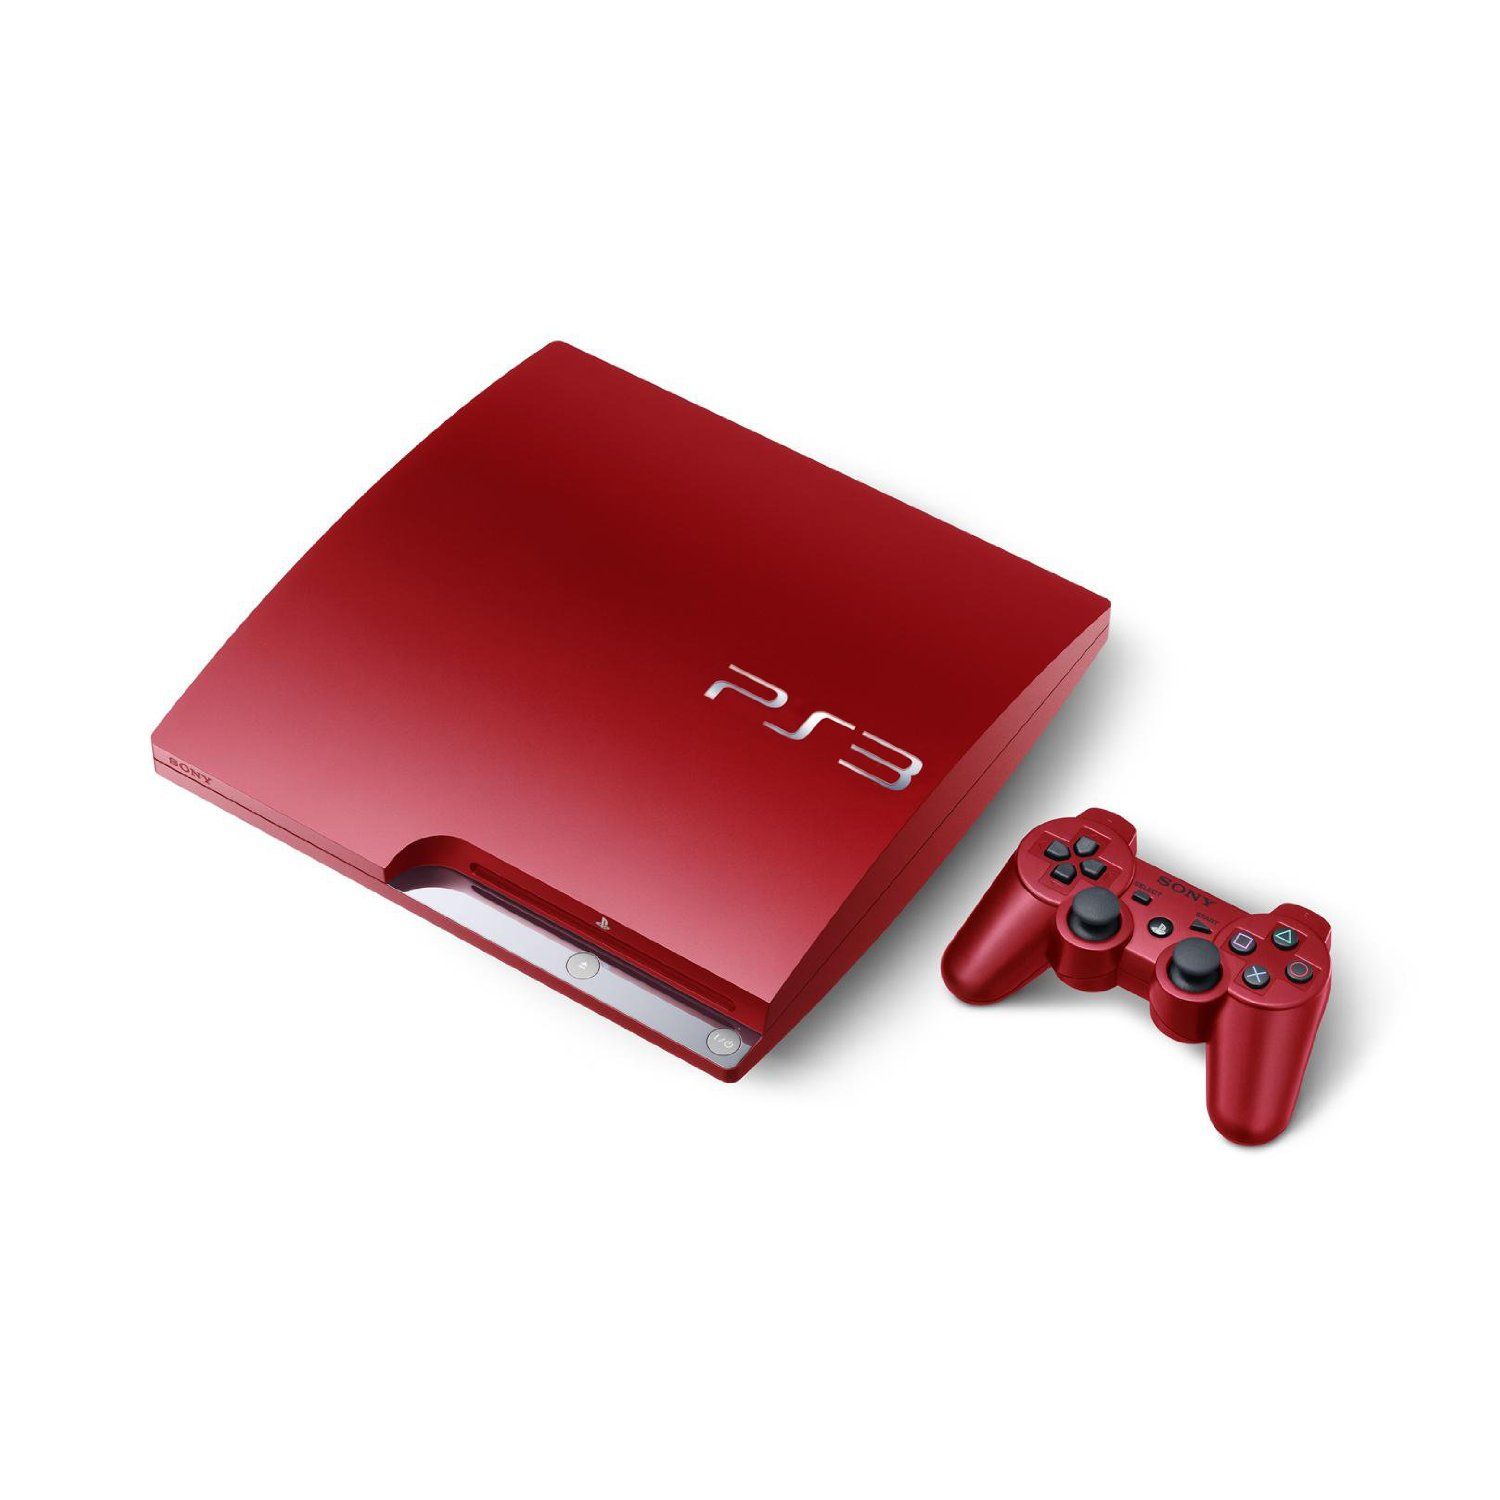 playstation 3 release date uk